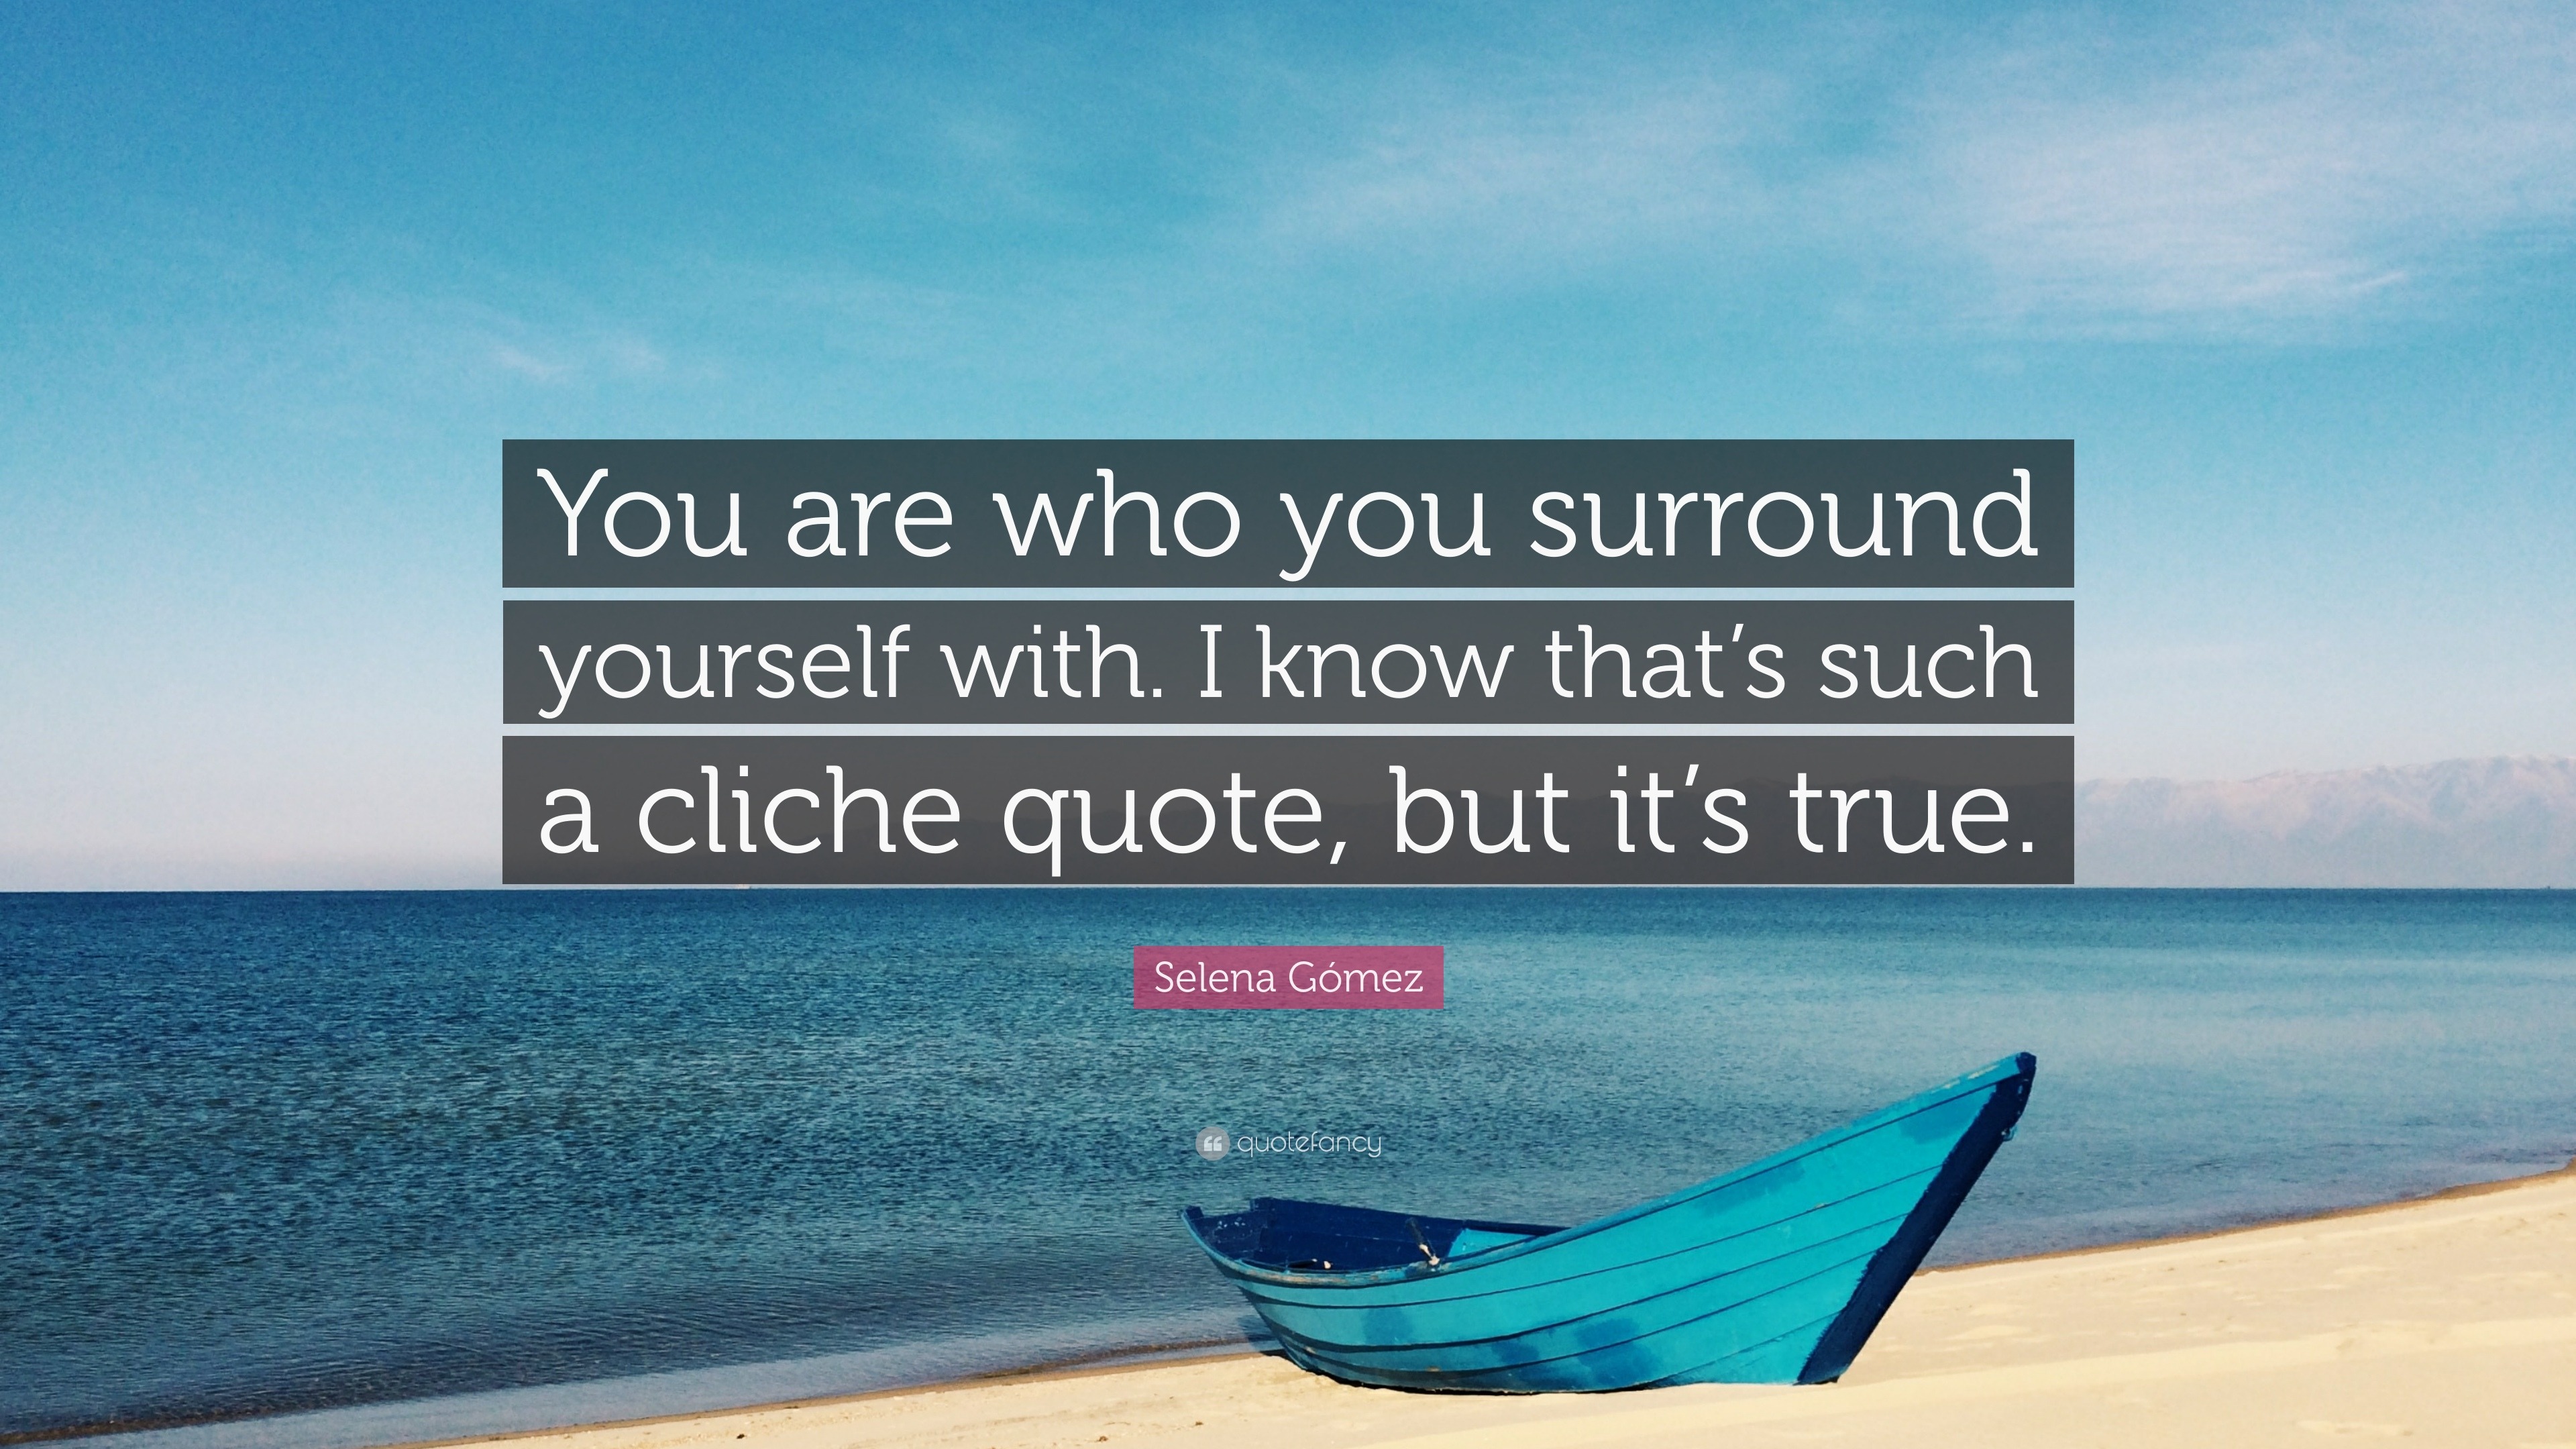 Selena Gómez Quote: “You are who you surround yourself with. I know